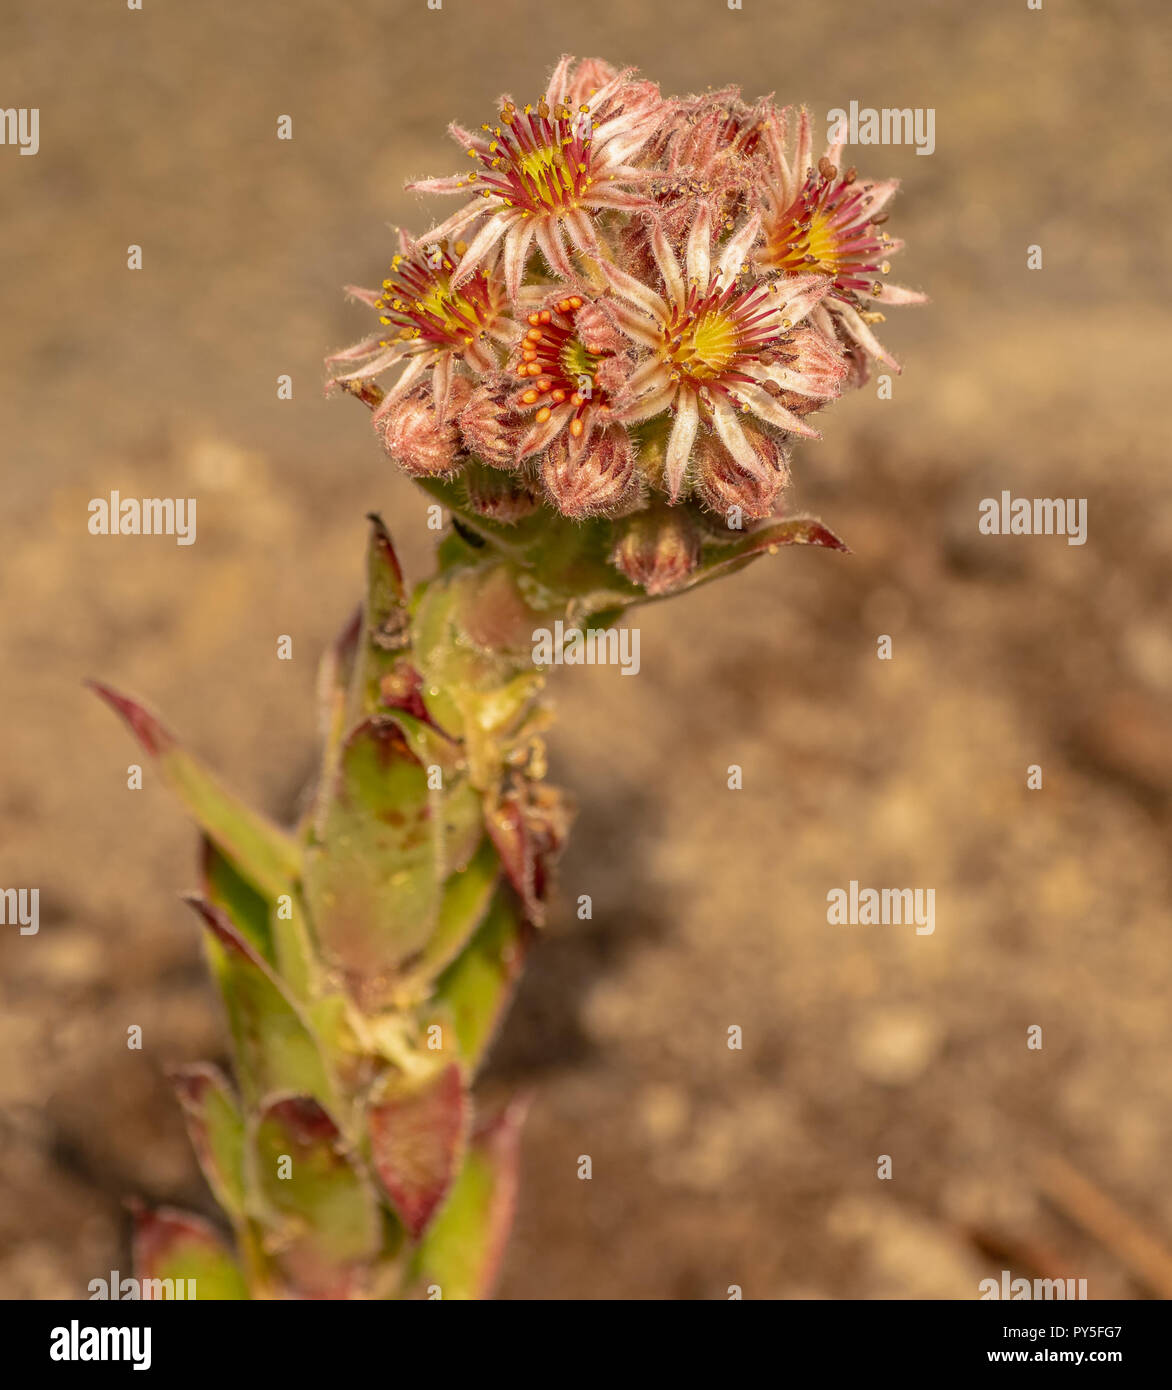 Warm color outdoorr macro of a single isolated sempervivum / echeveria plant with many blossoms on natural blurred background, hot sunny summer dsy Stock Photo